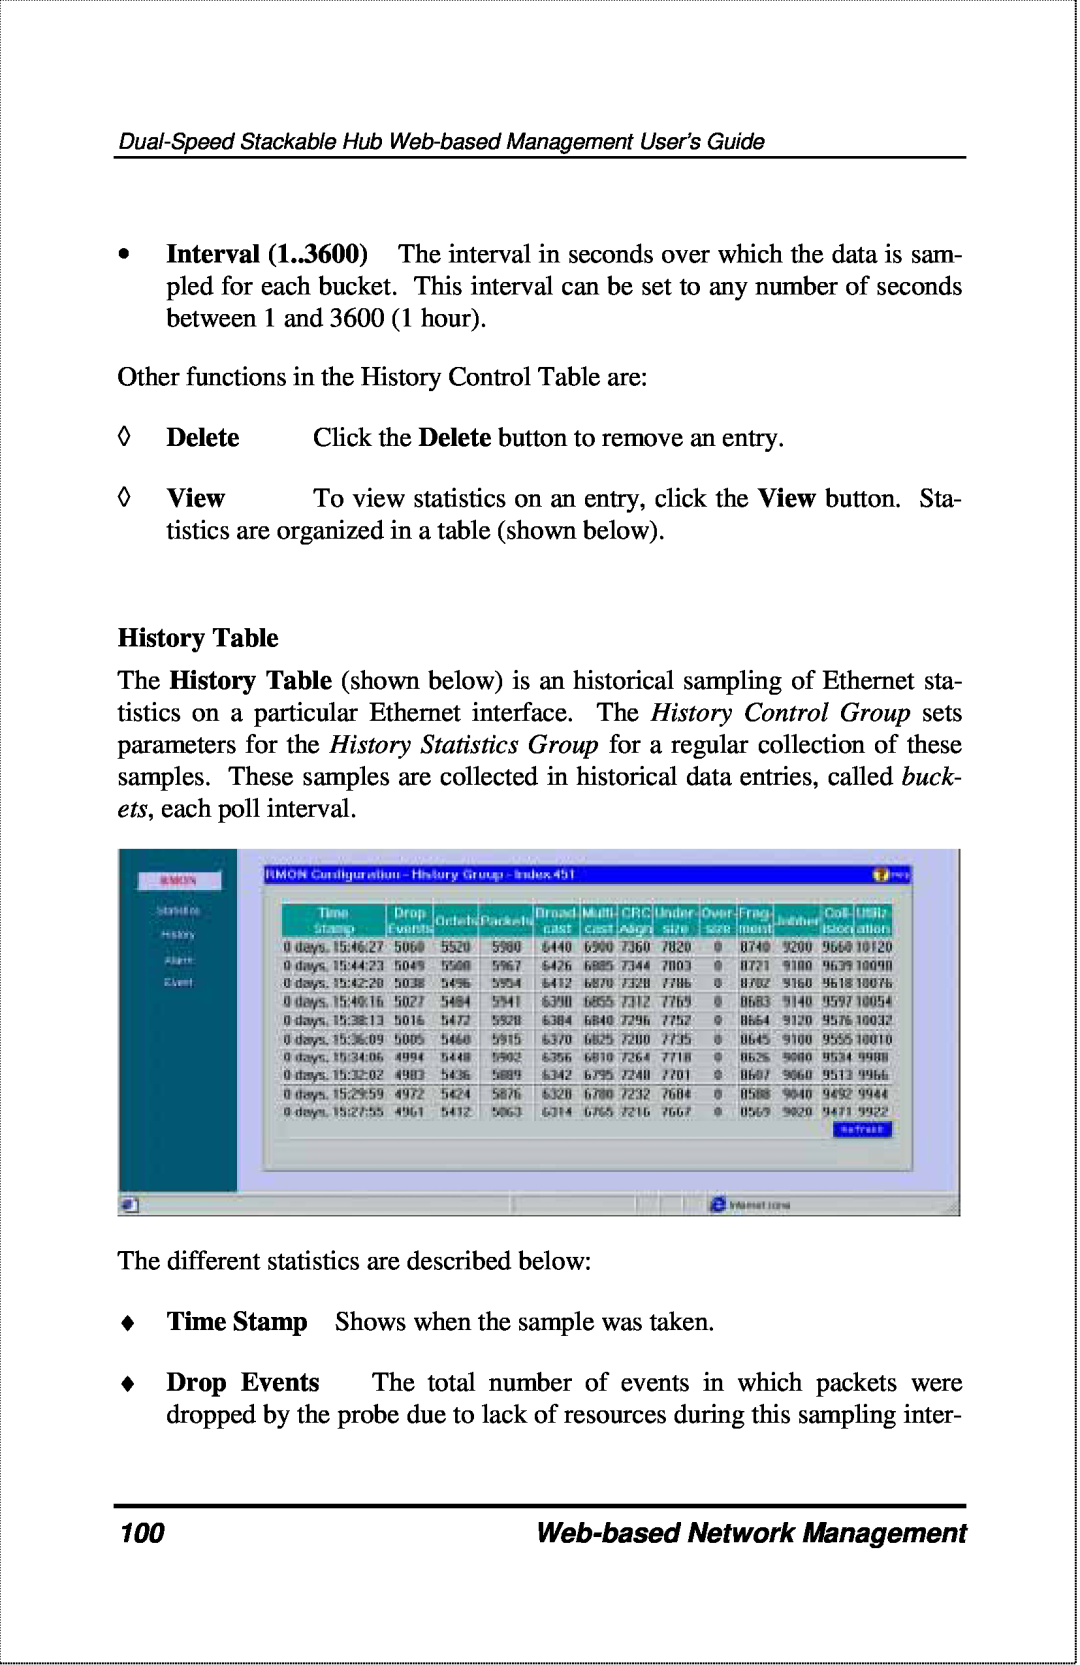 D-Link DFE-2600 manual History Table, Web-based Network Management 